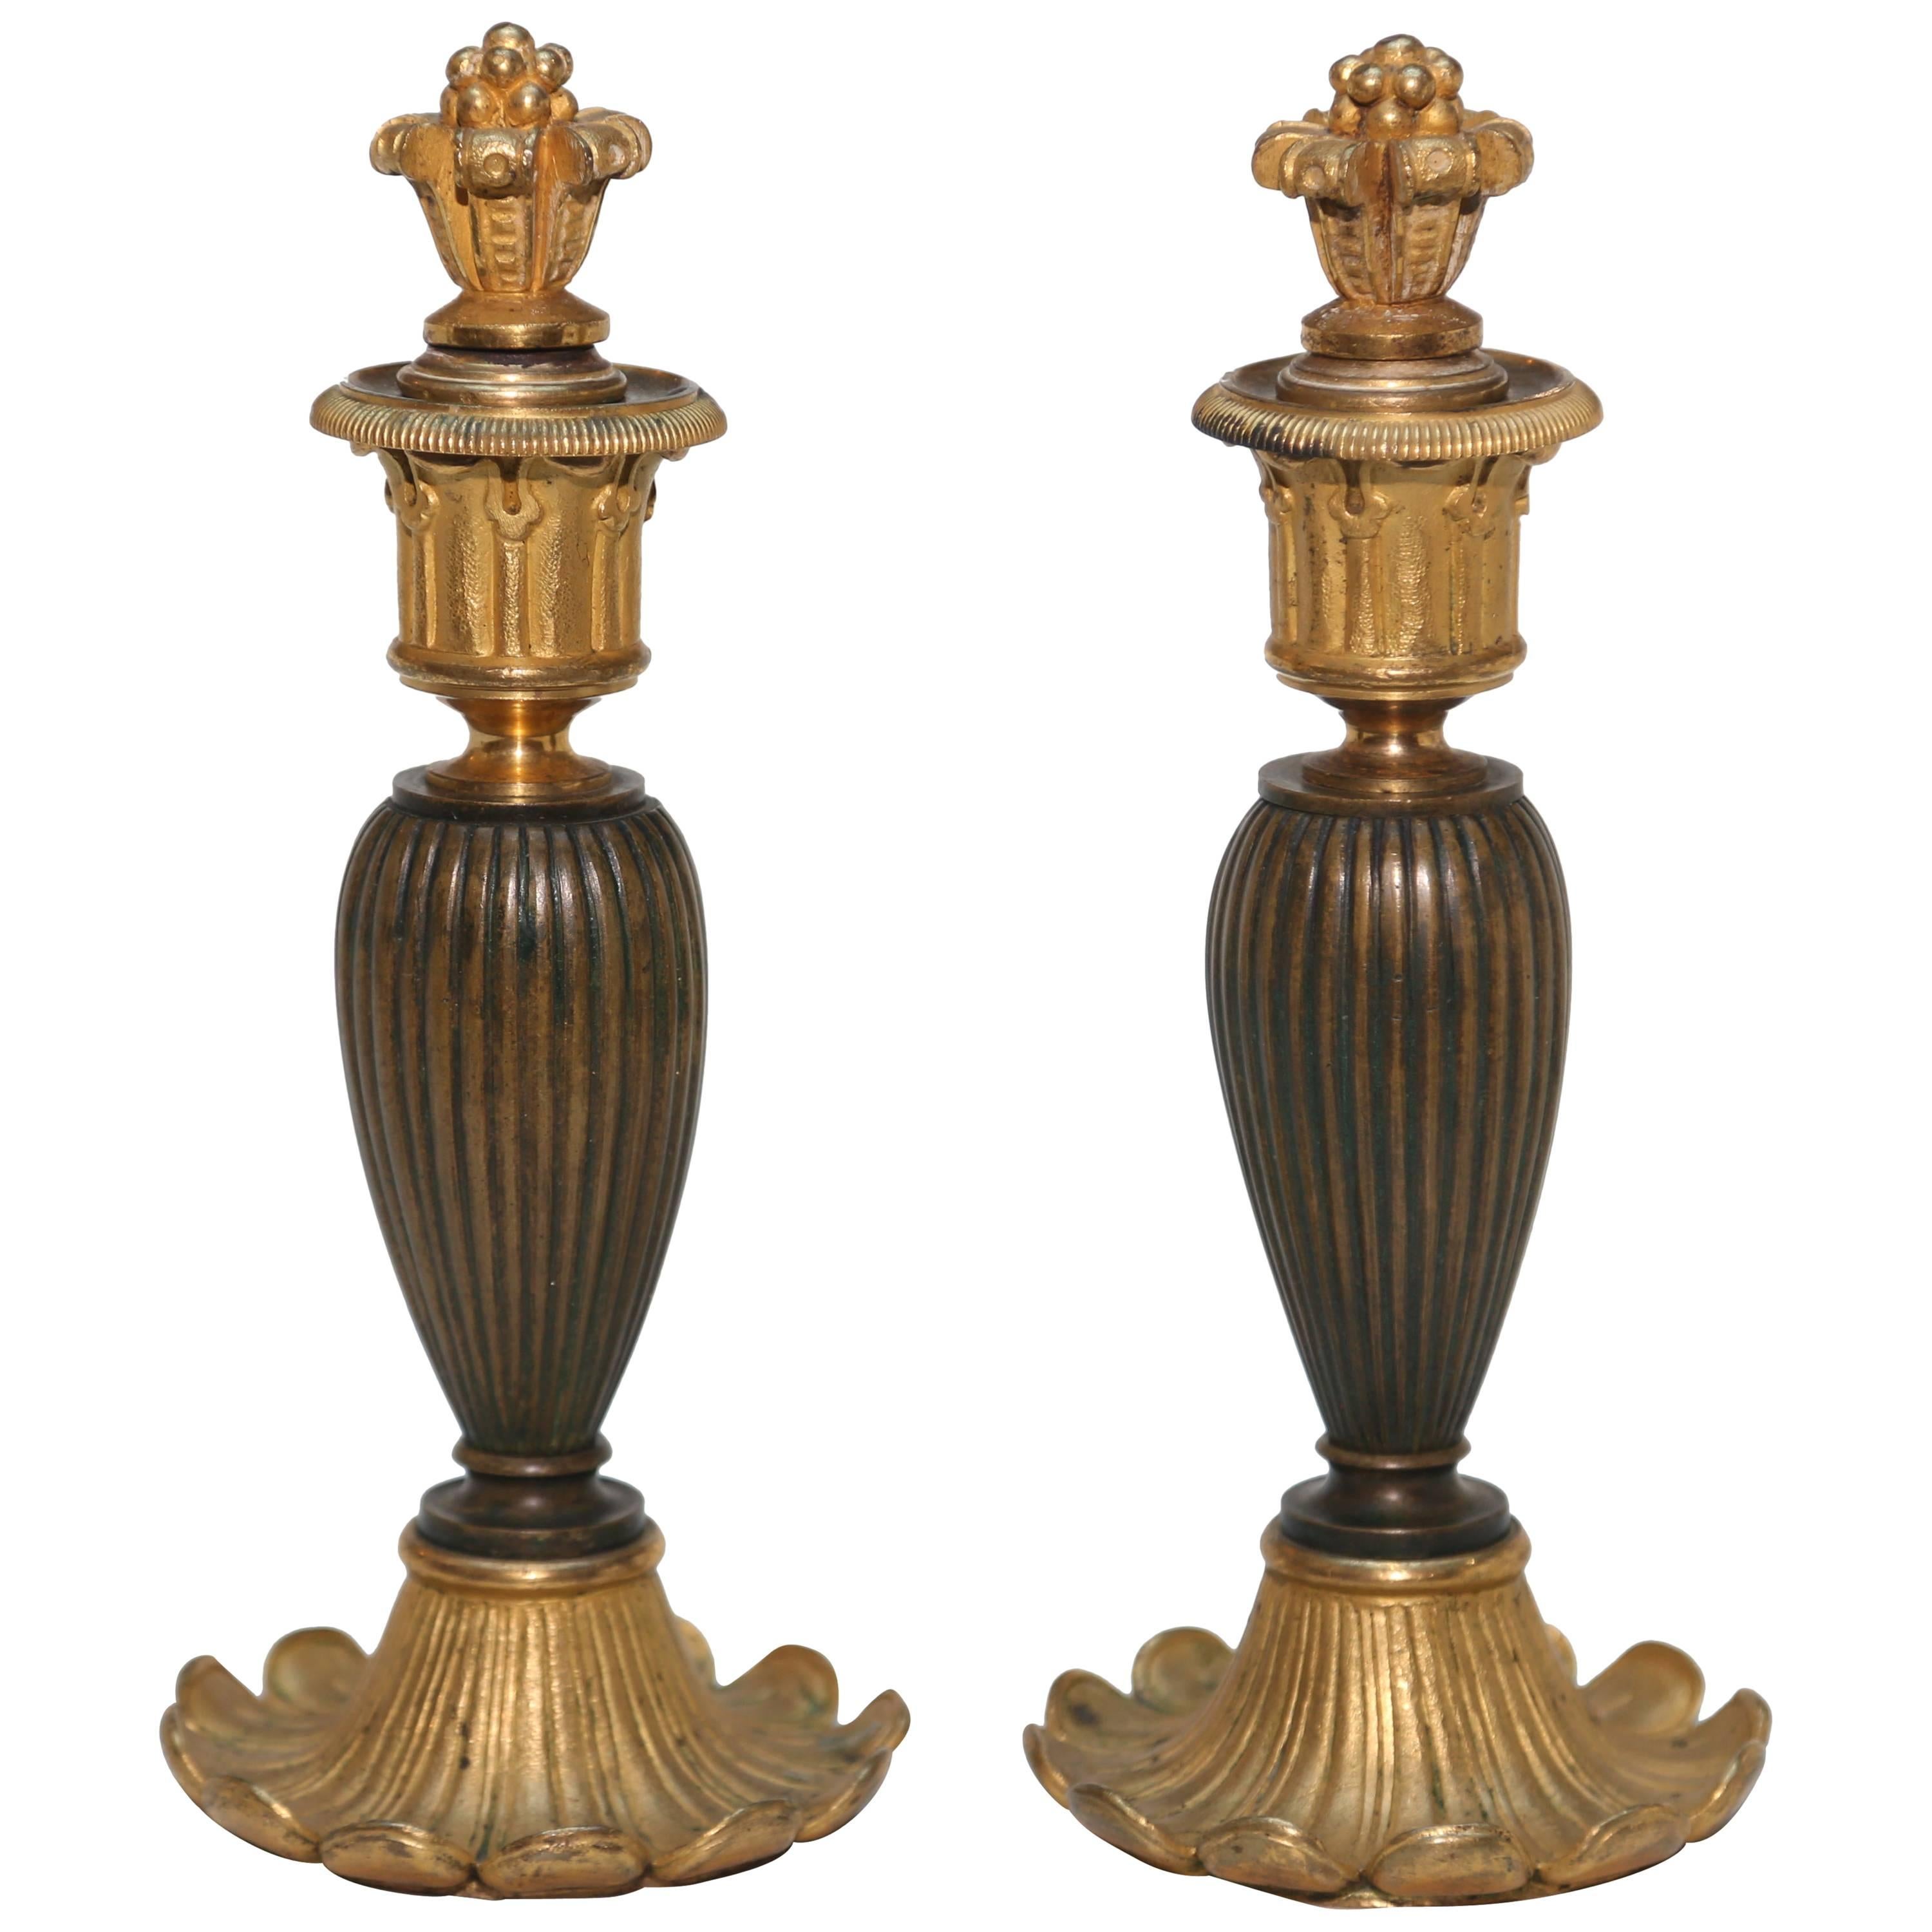 Fanciful 19th Century Bronze Candlesticks with Snuffers